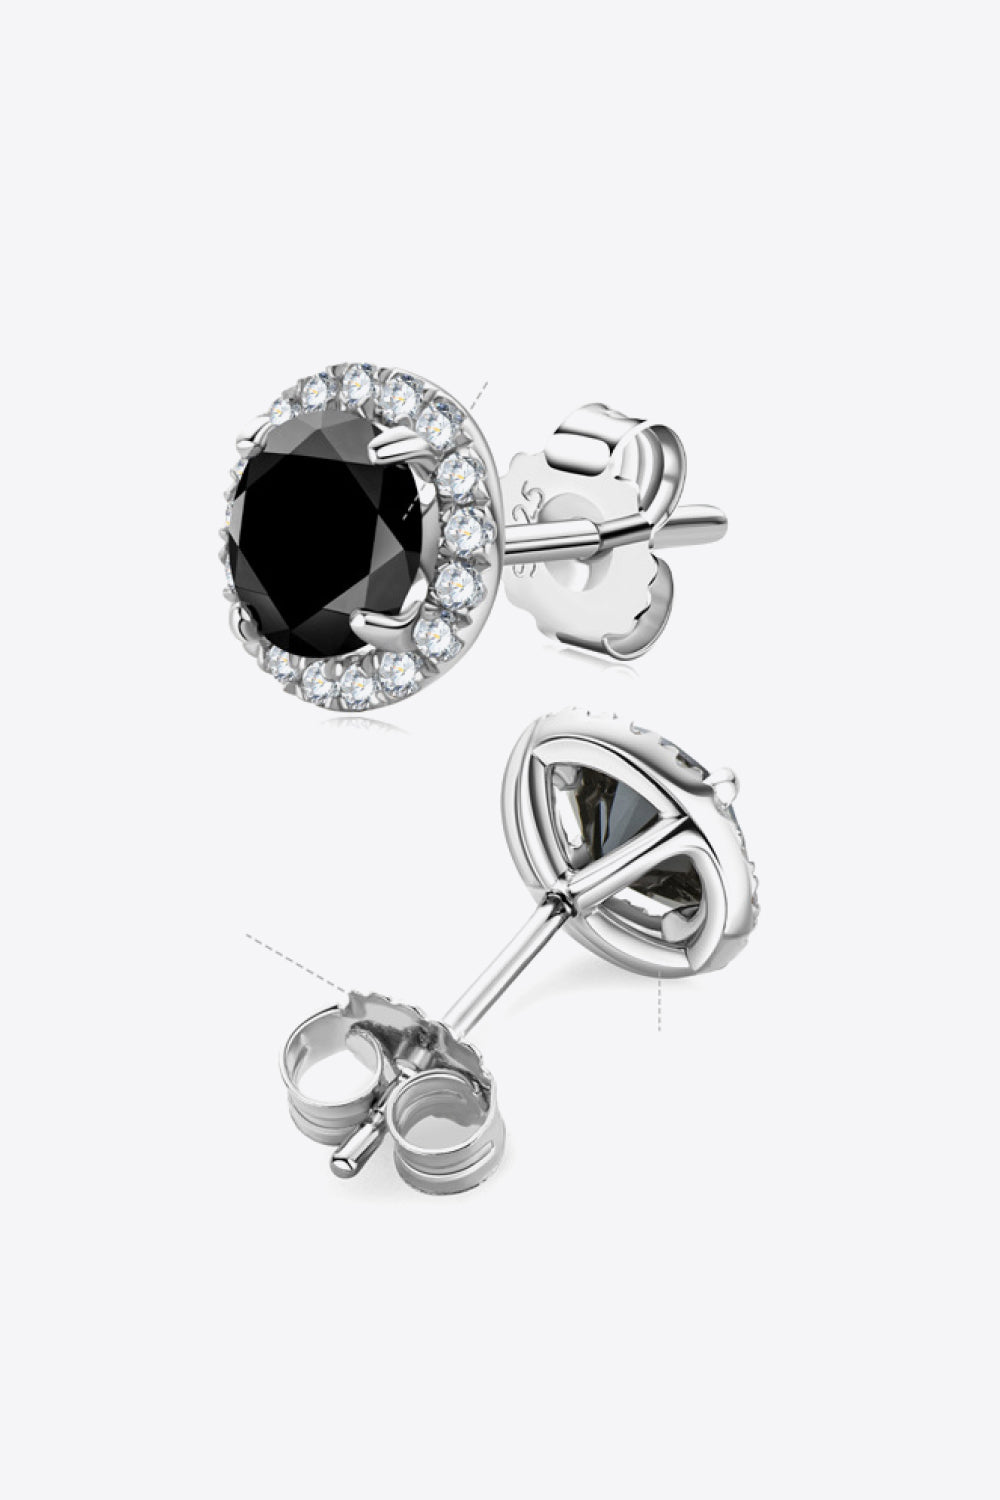 Two-Tone 4-Prong Moissanite Stud Earrings-Earrings-Inspired by Justeen-Women's Clothing Boutique in Chicago, Illinois